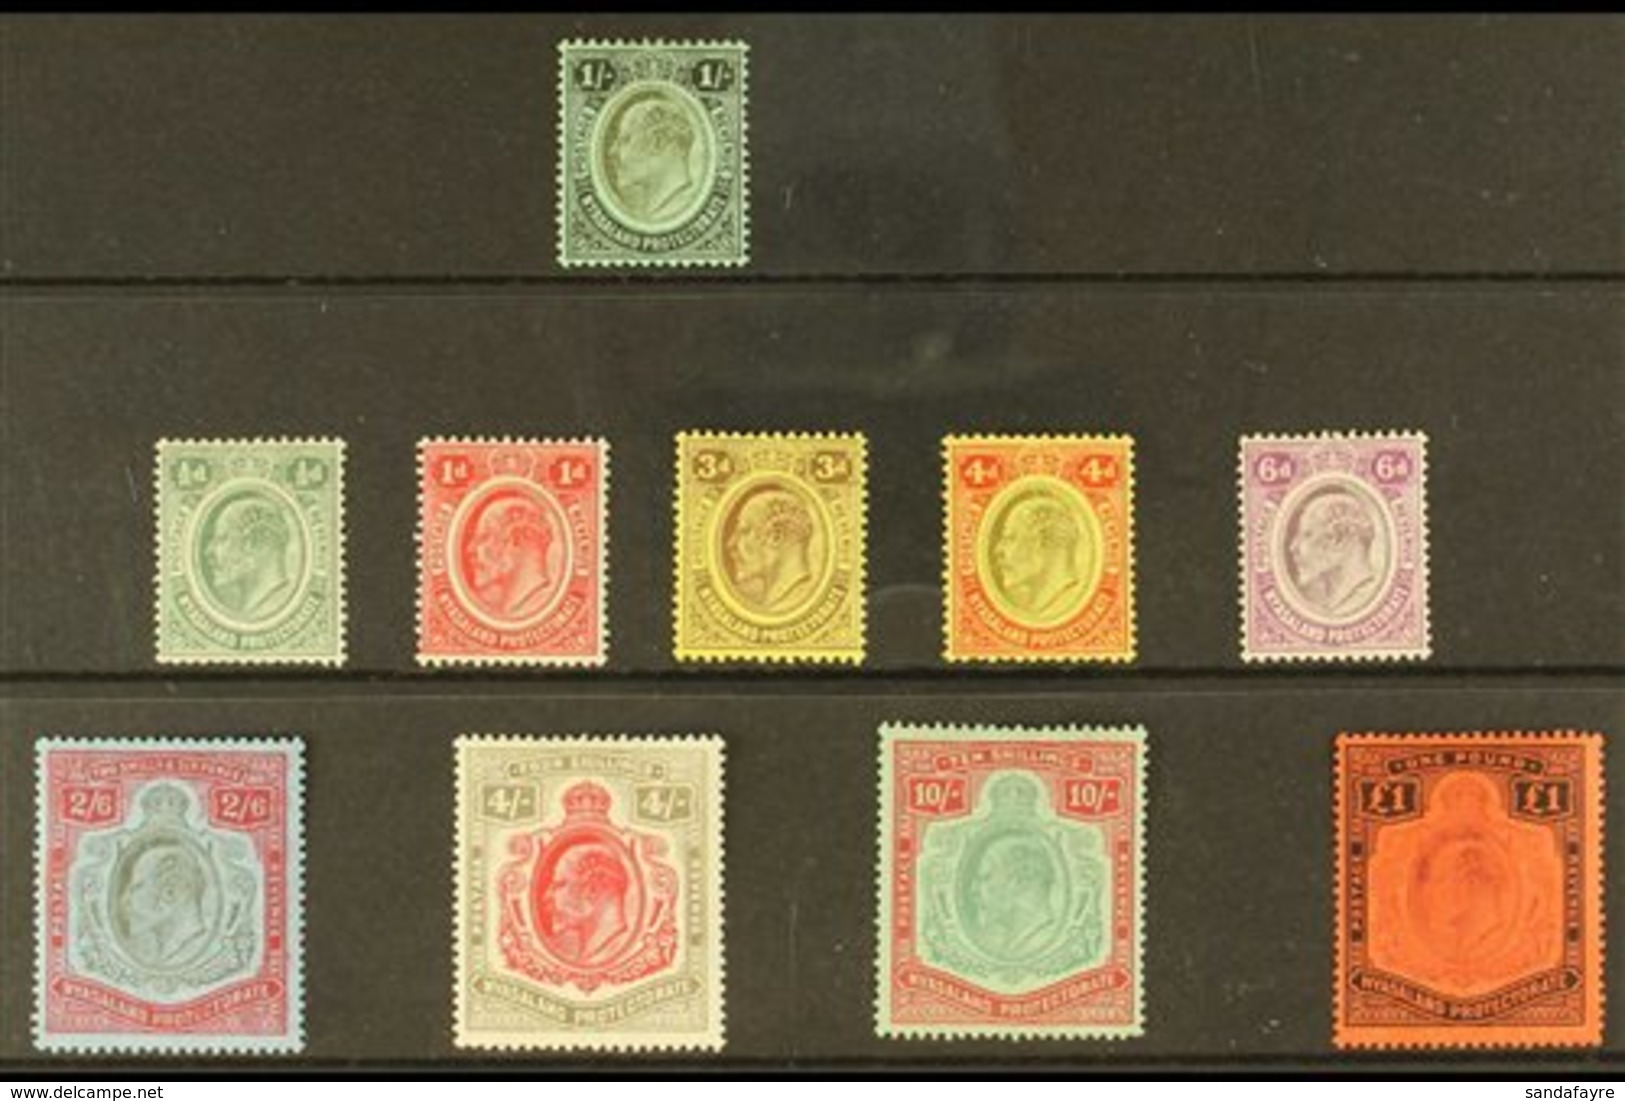 1908-1911  KEVII Definitive Set To £1, SG 72/81, The £1 With Faded Vignette With Some Light Surface Rubbing, The Rest, V - Nyasaland (1907-1953)